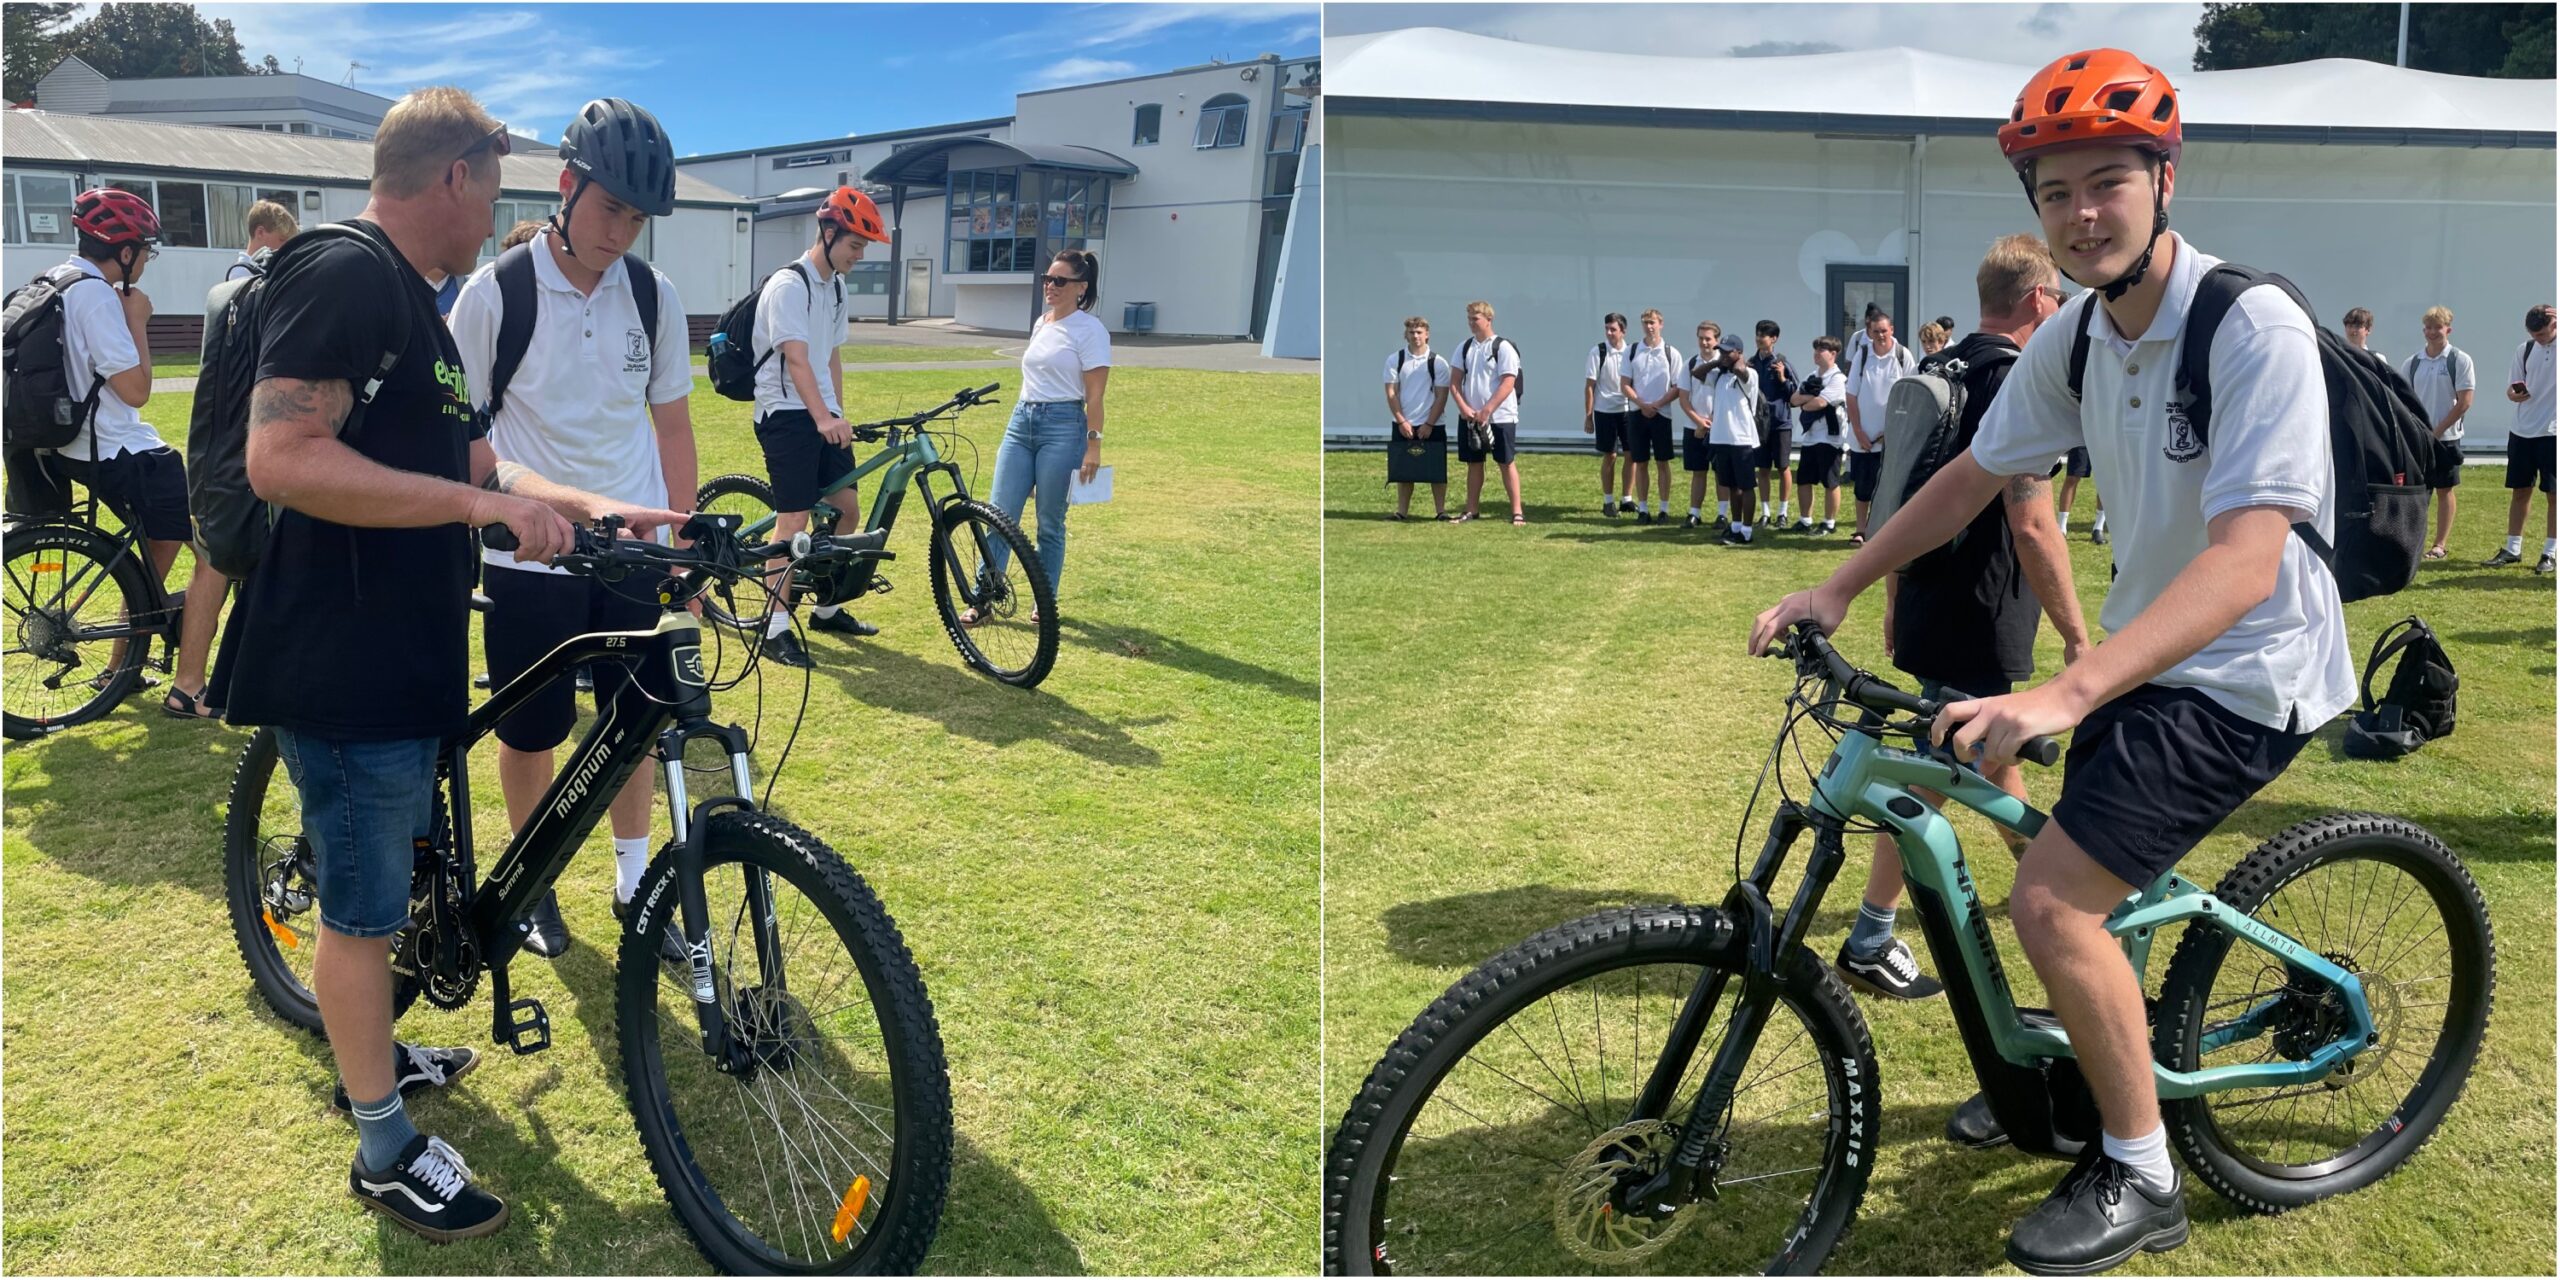 Two photos side by side show students riding electric bikes outside.